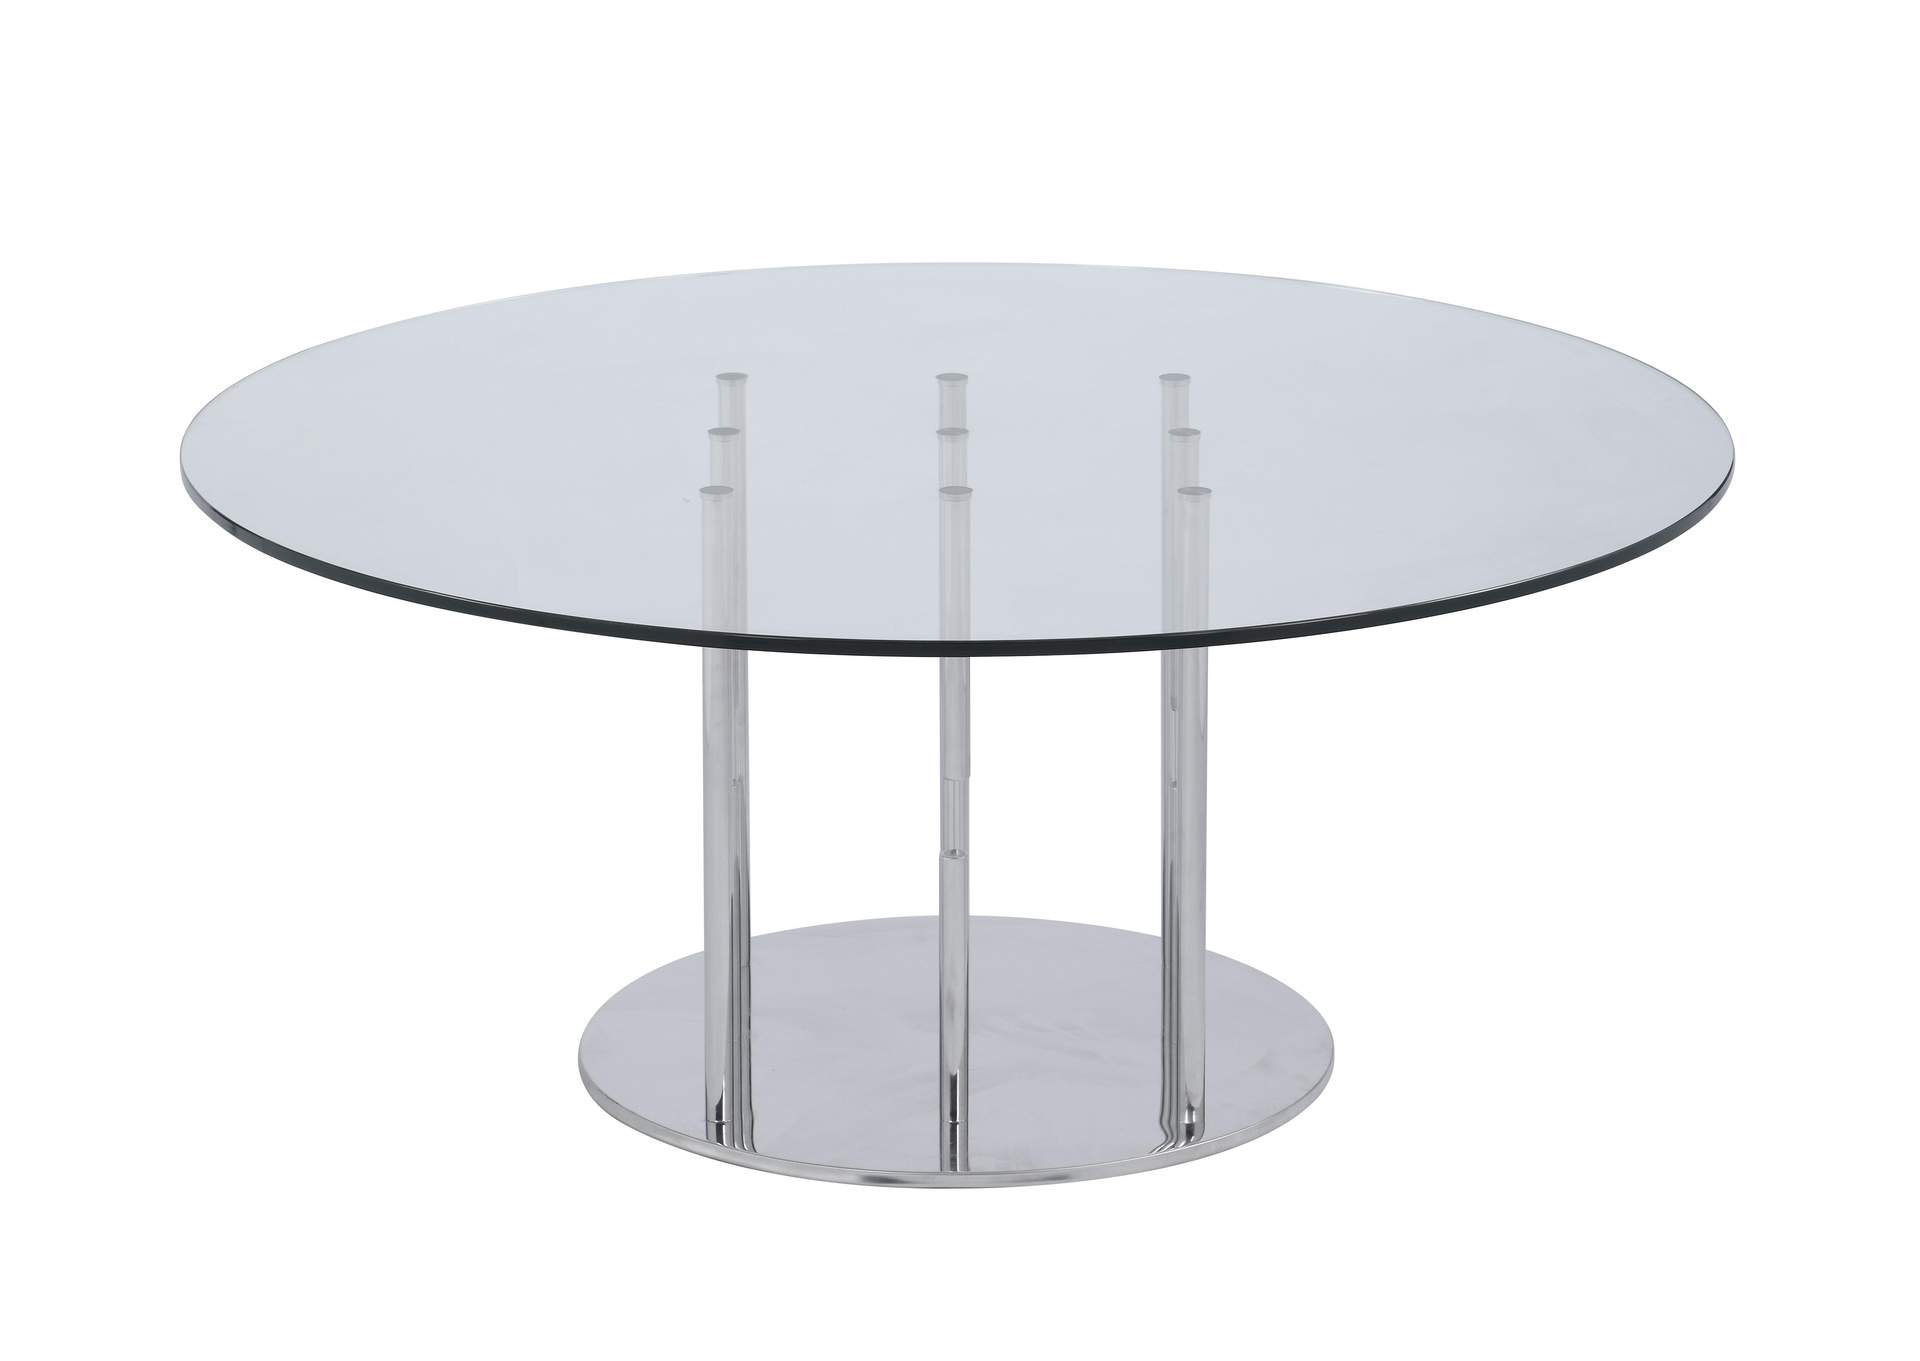 Contemporary Floating Pedestal Cocktail Table,Chintaly Imports